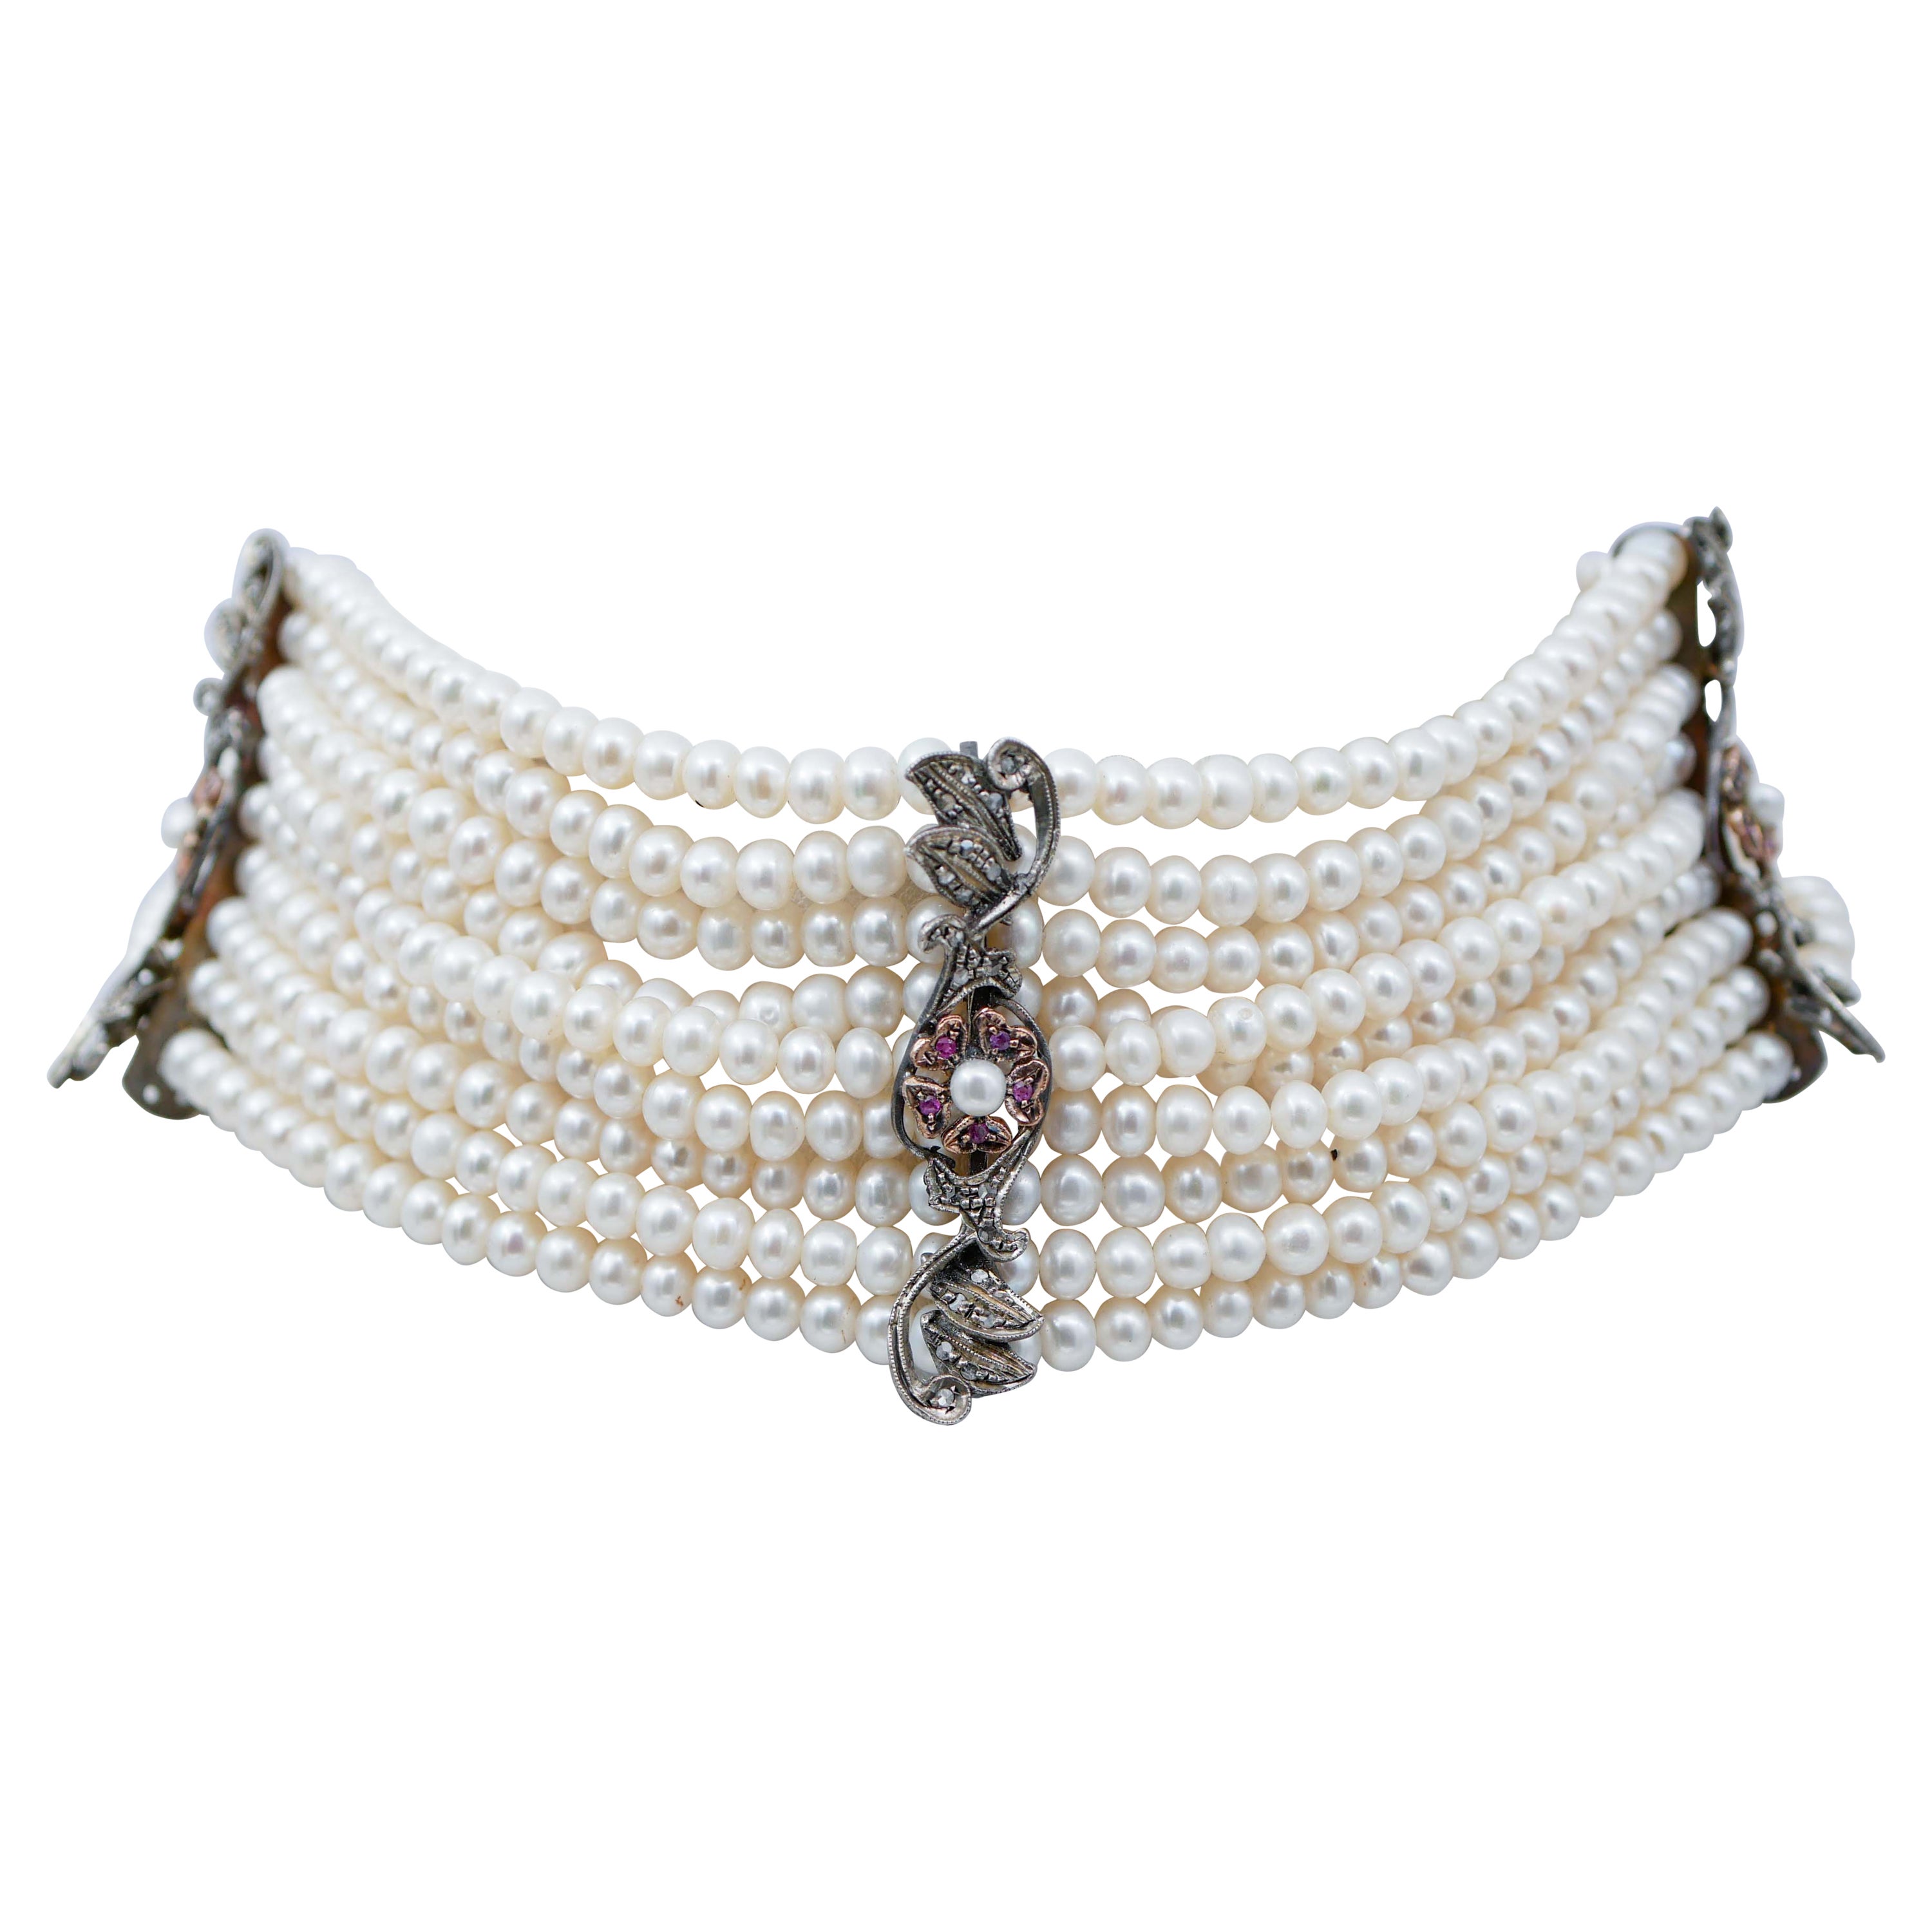 Pearls, Rubies, Diamonds, Rose Gold and Silver Retrò Necklace